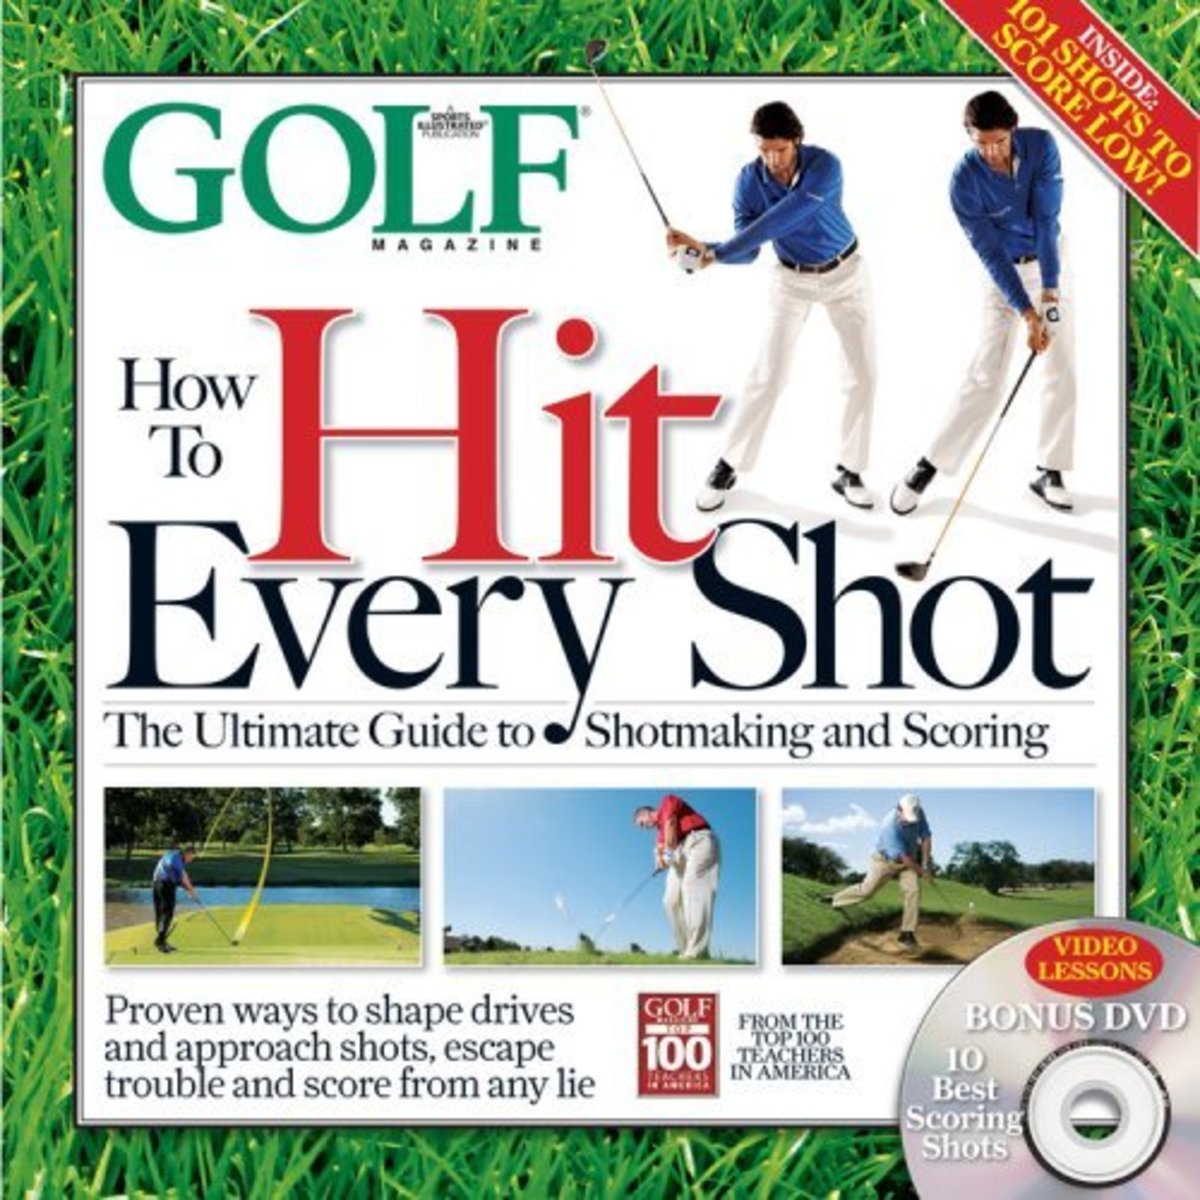 GOLF Magazine's "How to Hit Every Shot"